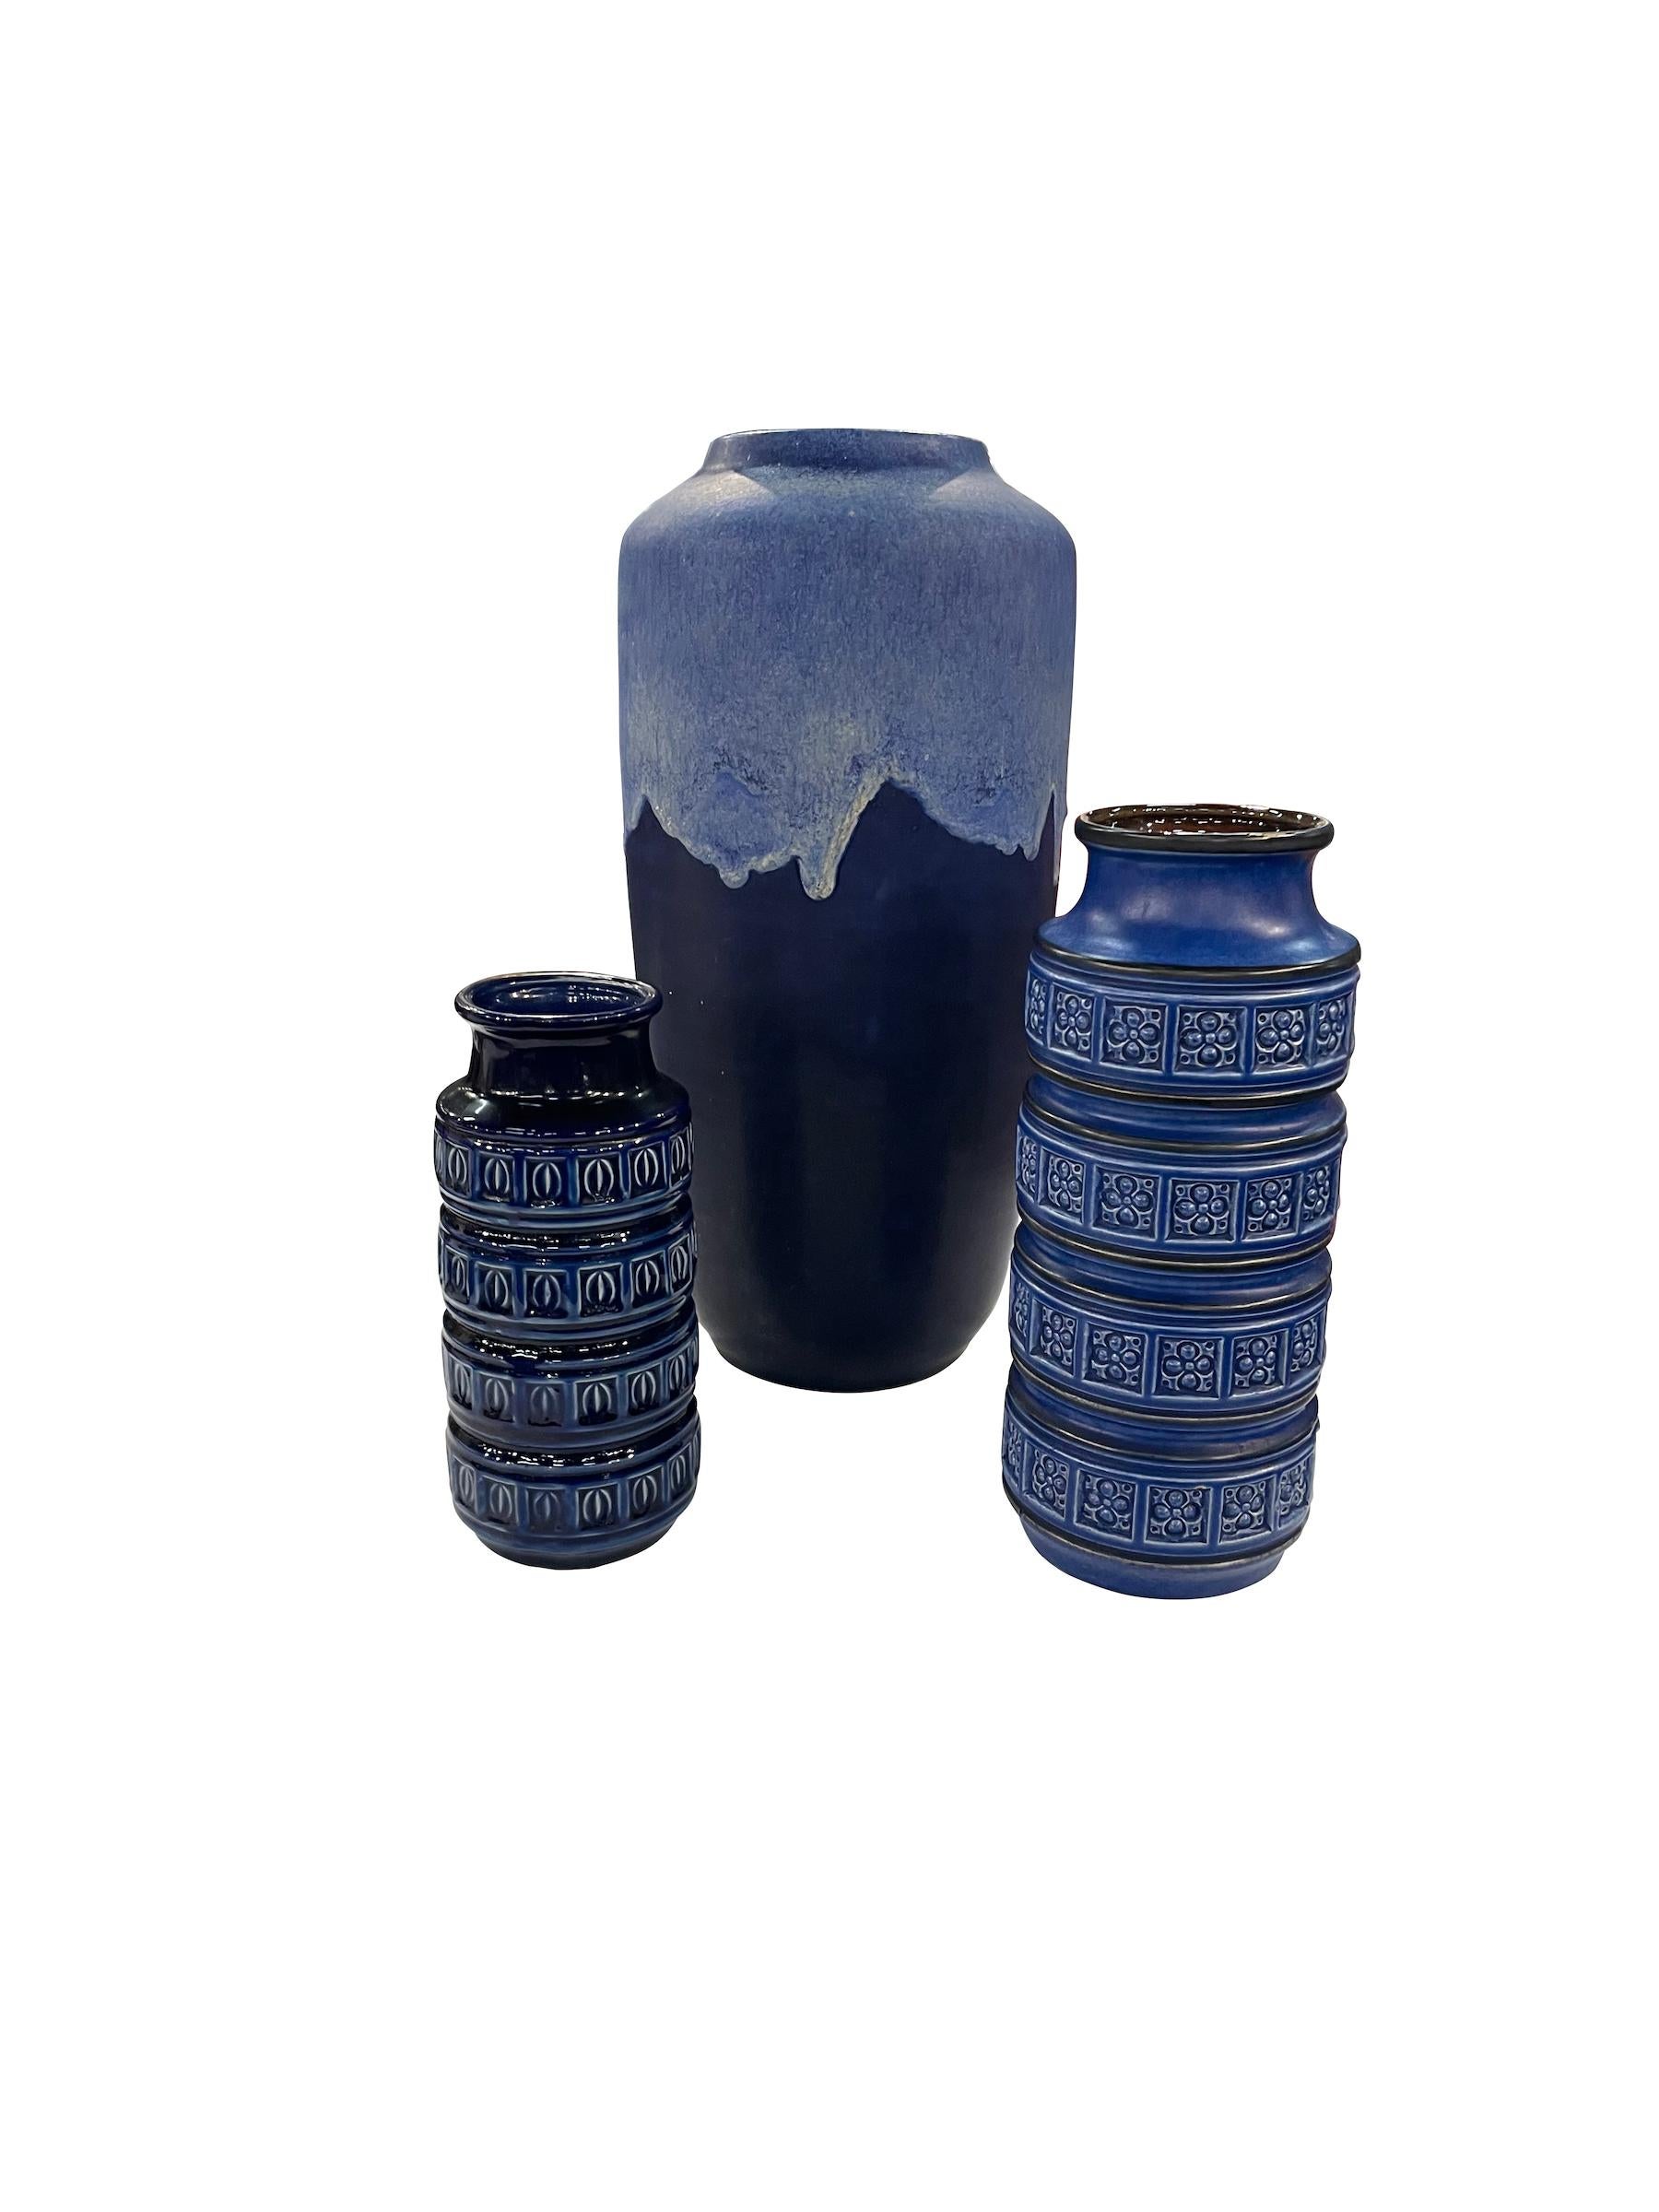 Cobalt Blue With Geometric Textured Bands Vase, Germany, Mid Century  For Sale 2